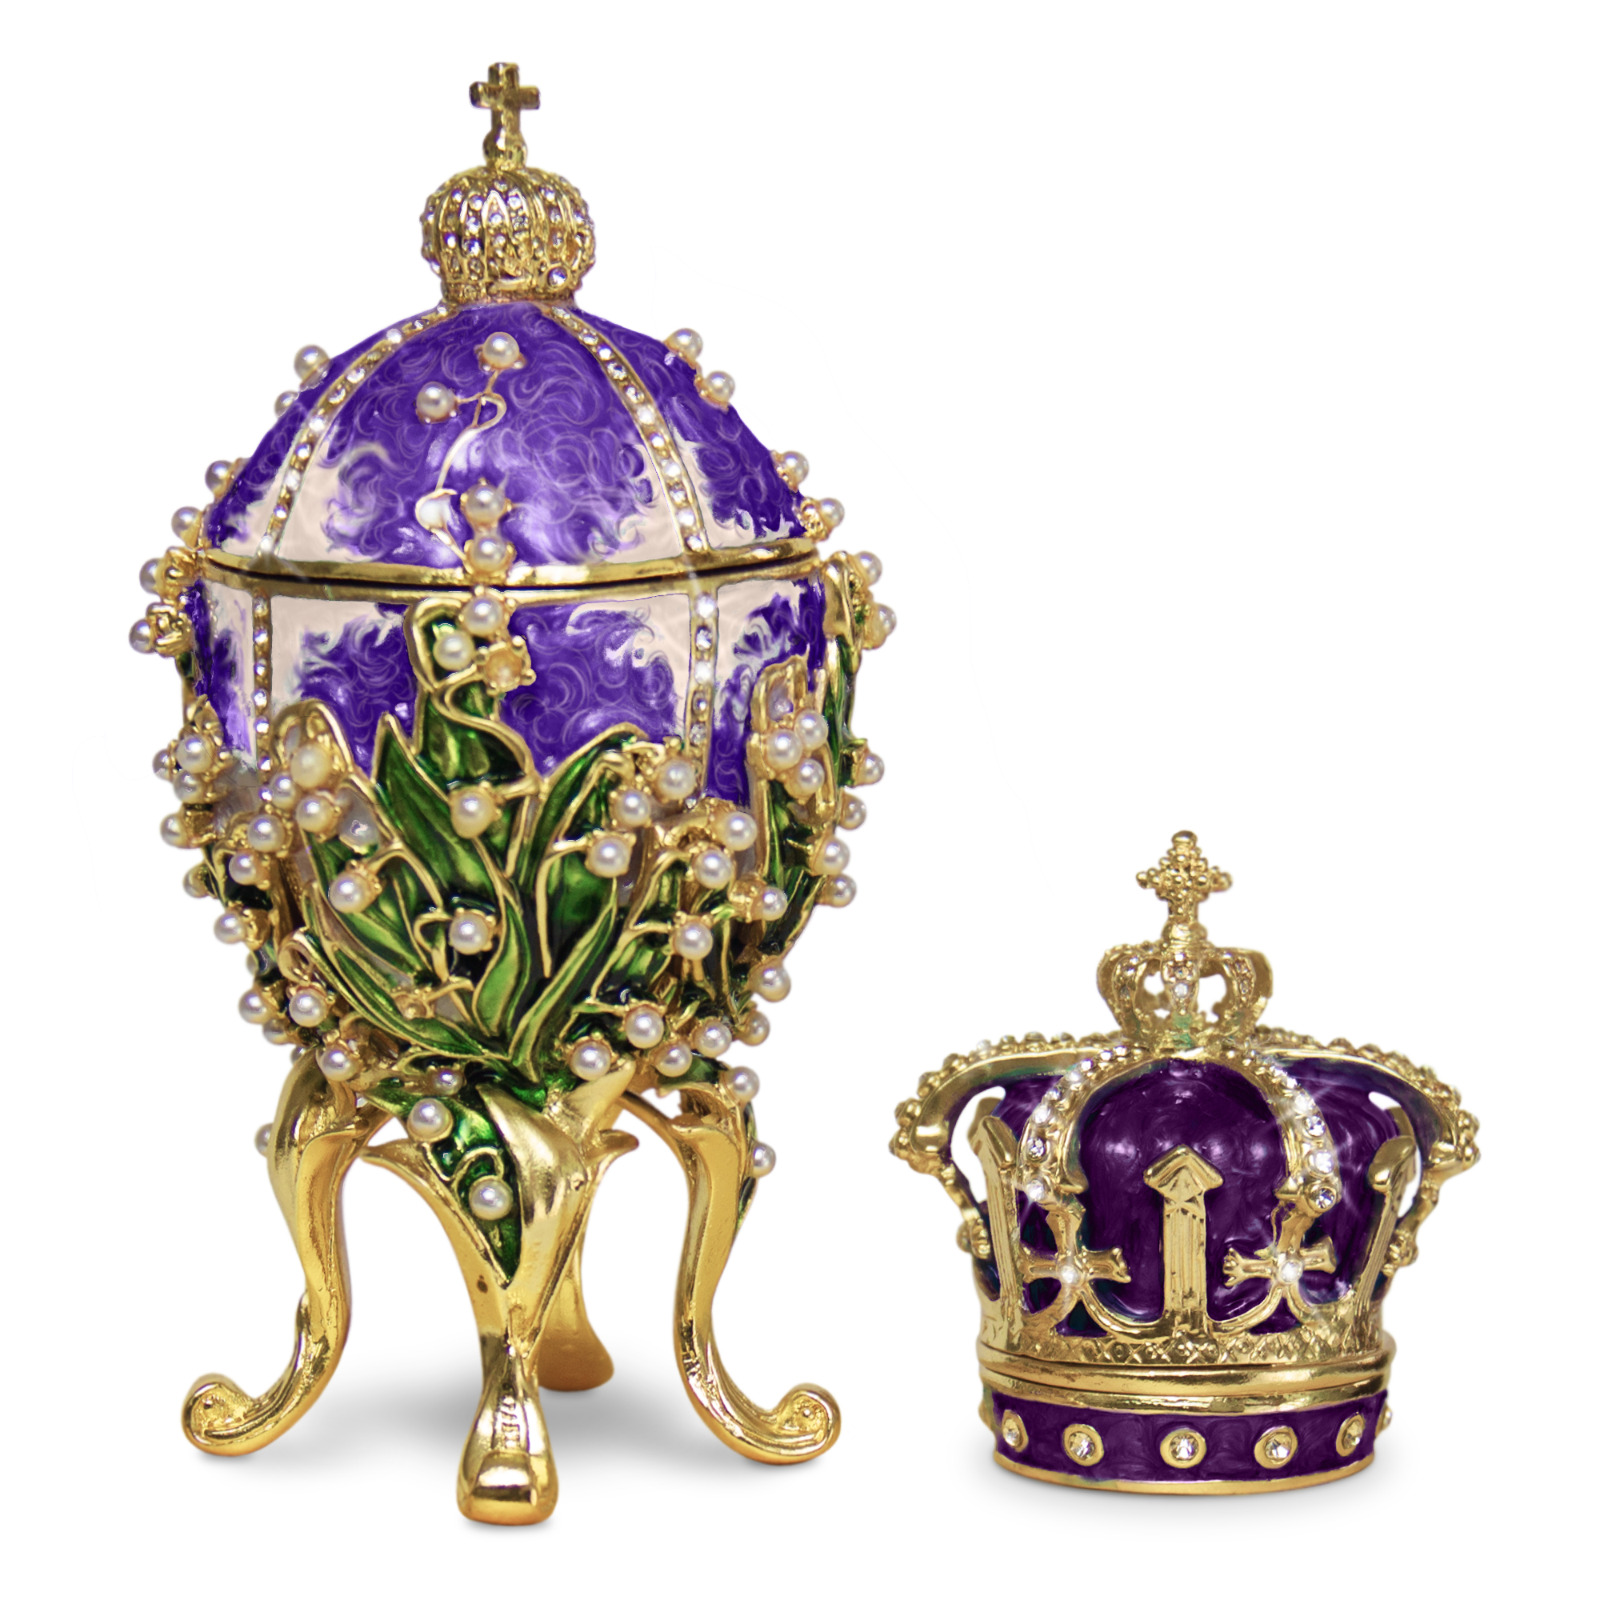 Purple Lilies of the Valley Faberge Egg Replica Extra Large 5.9 inch + Crown